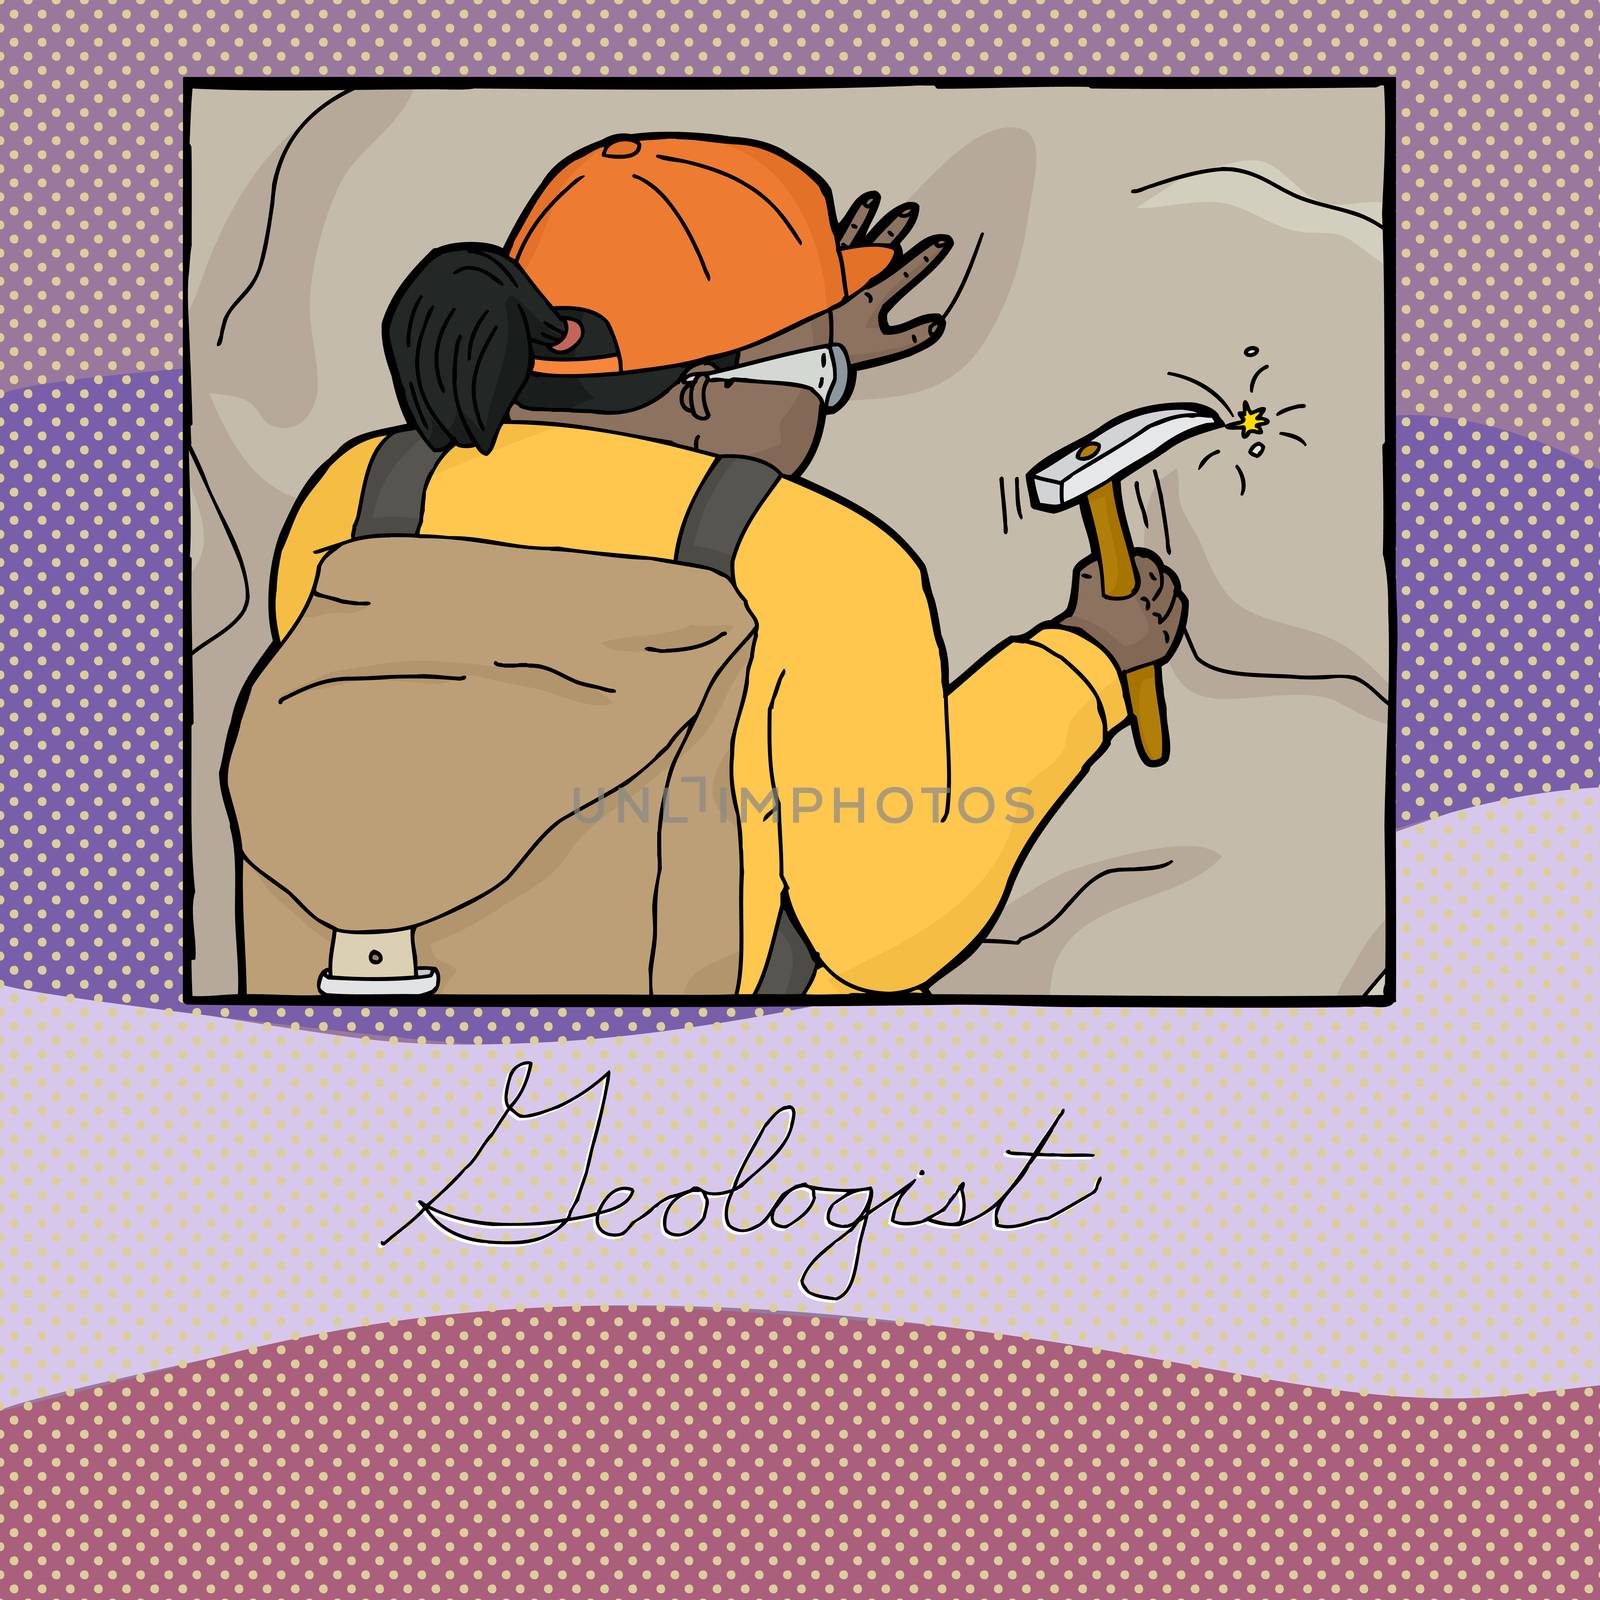 Graphic About Female Geologist by TheBlackRhino